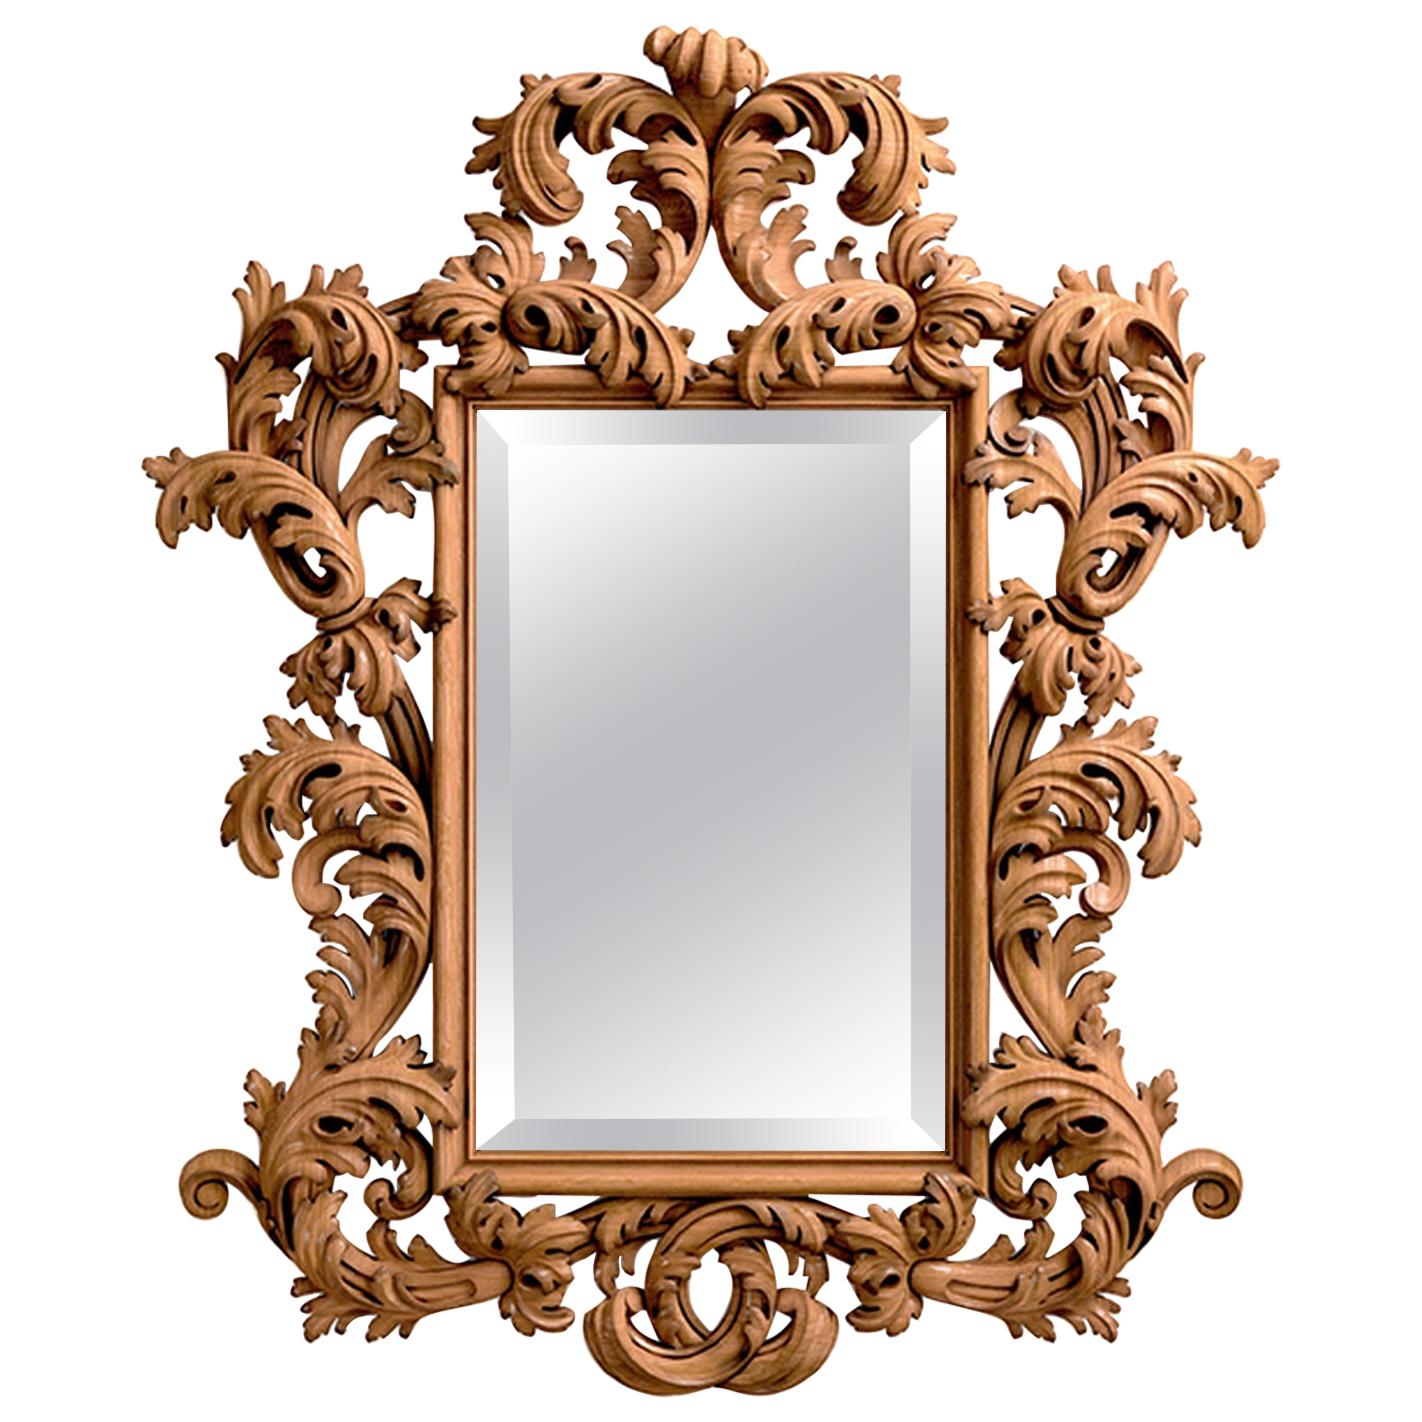 Baroque Style Large Architectural Custom Made Carved Wood Wall Mirror Frame For Sale